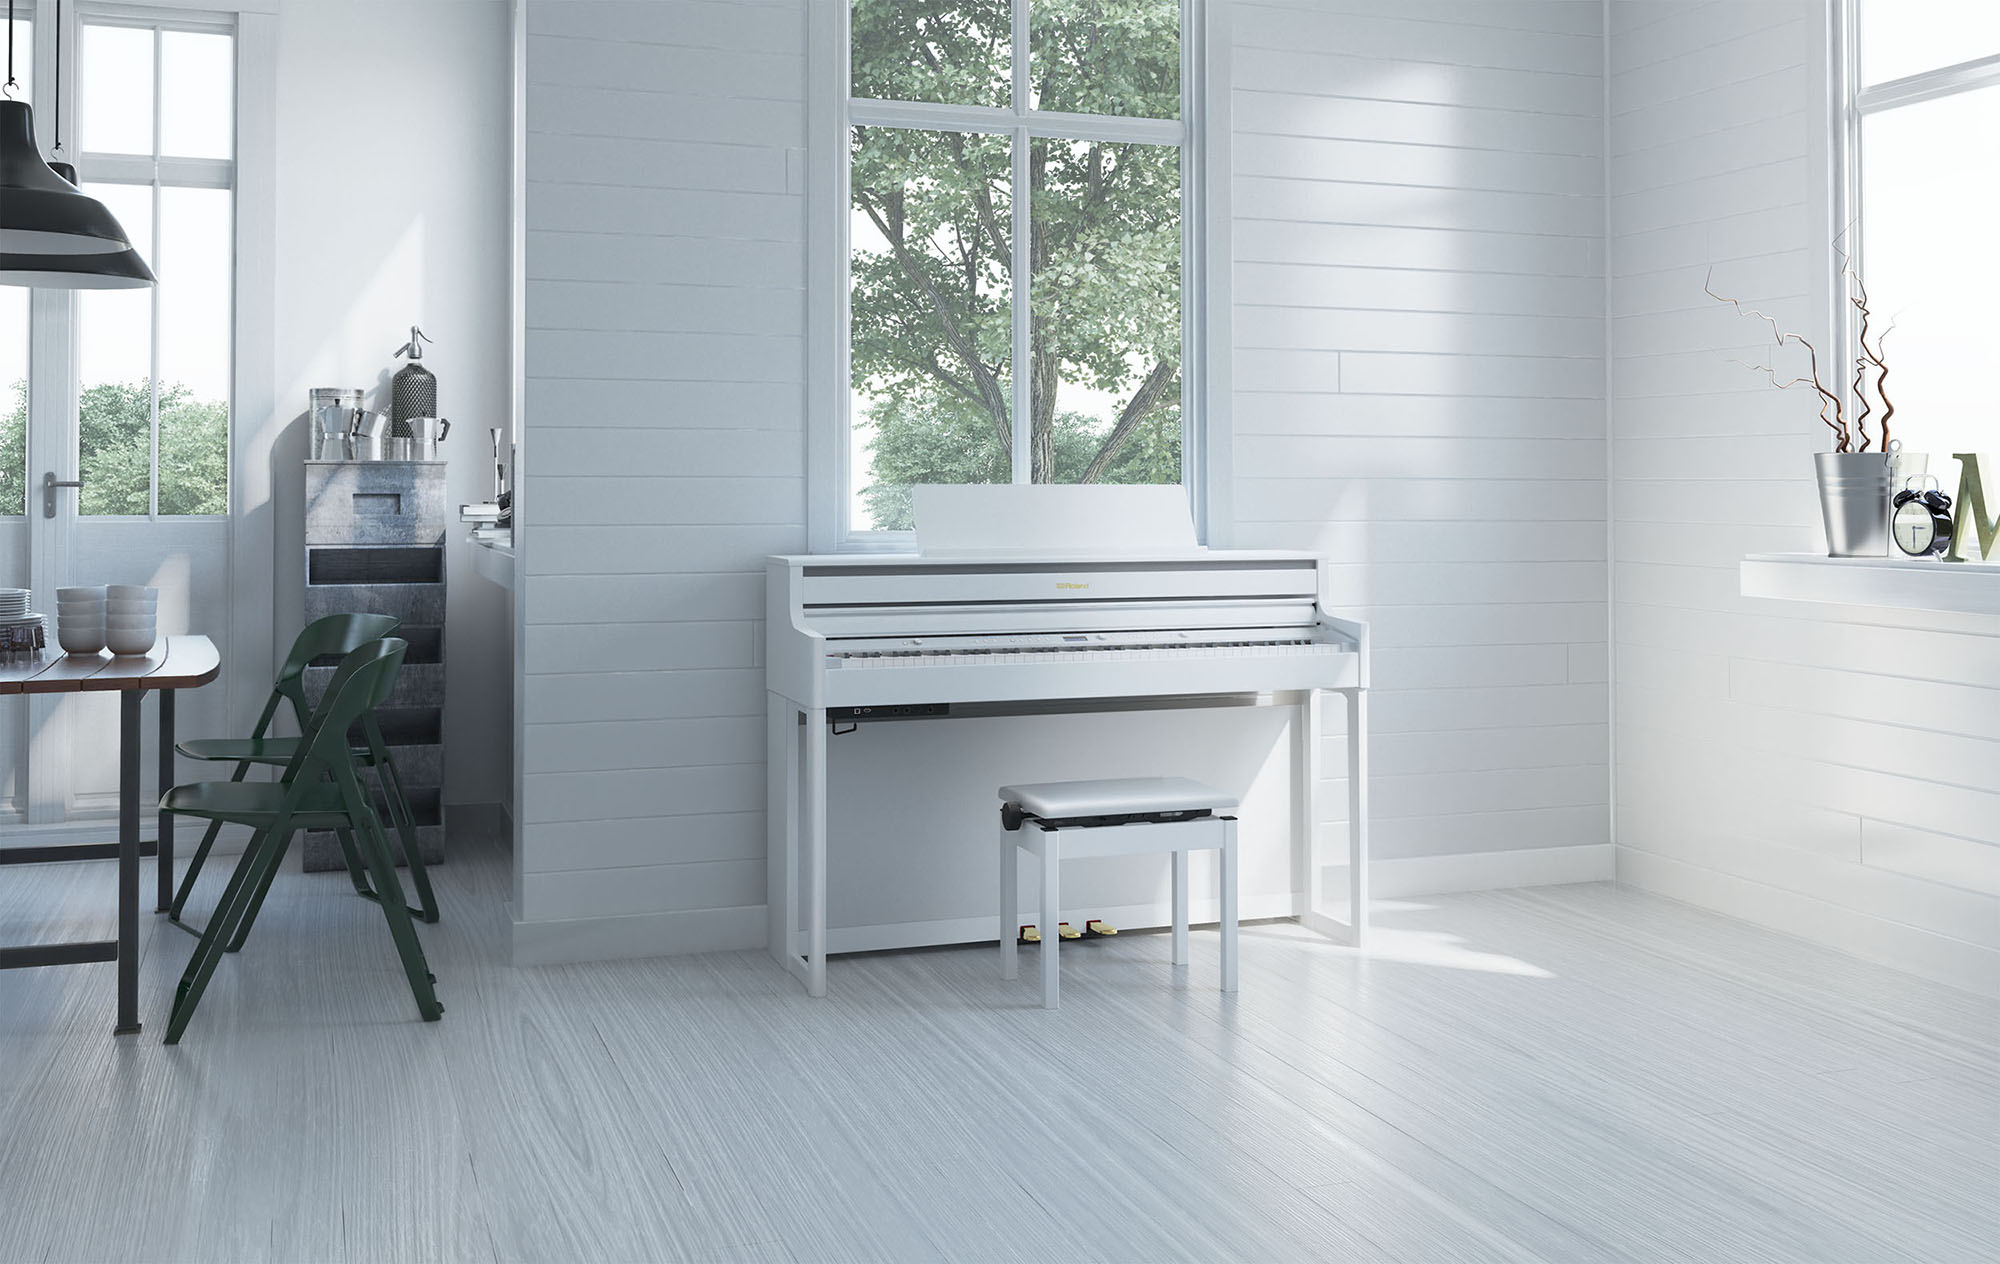 Roland Hp704 Wh White - Digitale piano met meubel - Variation 1